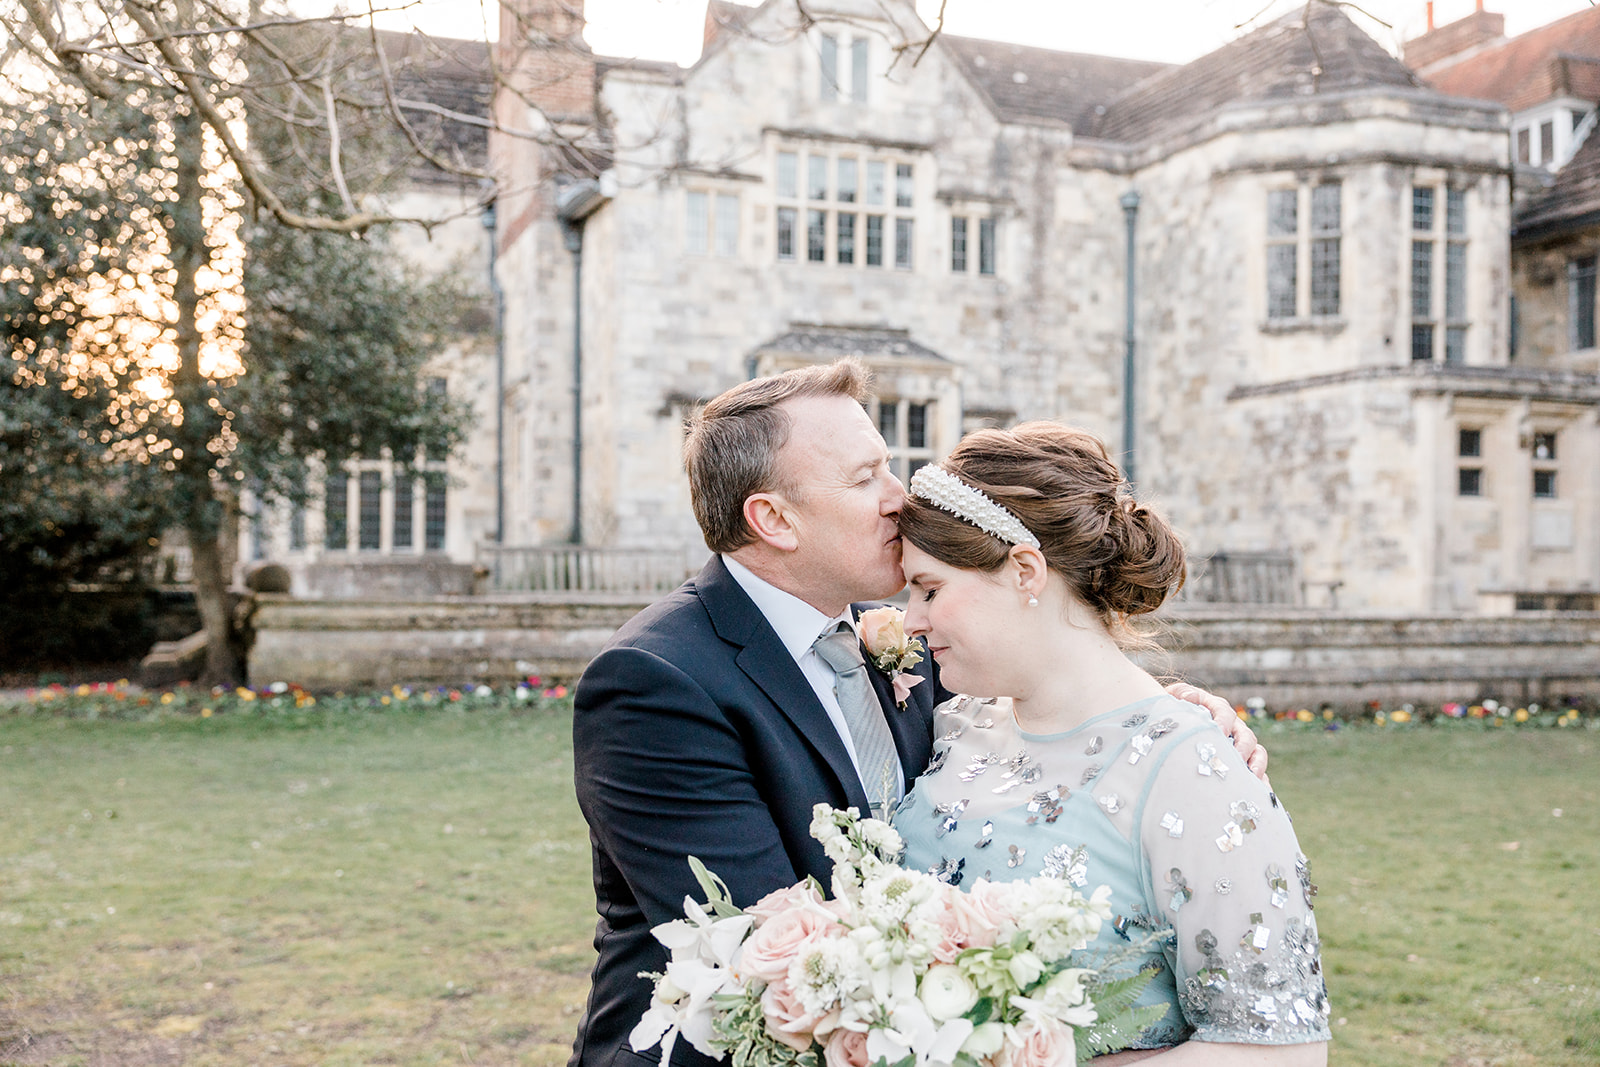 Romantic english wedding - Kelsie Scully Photography